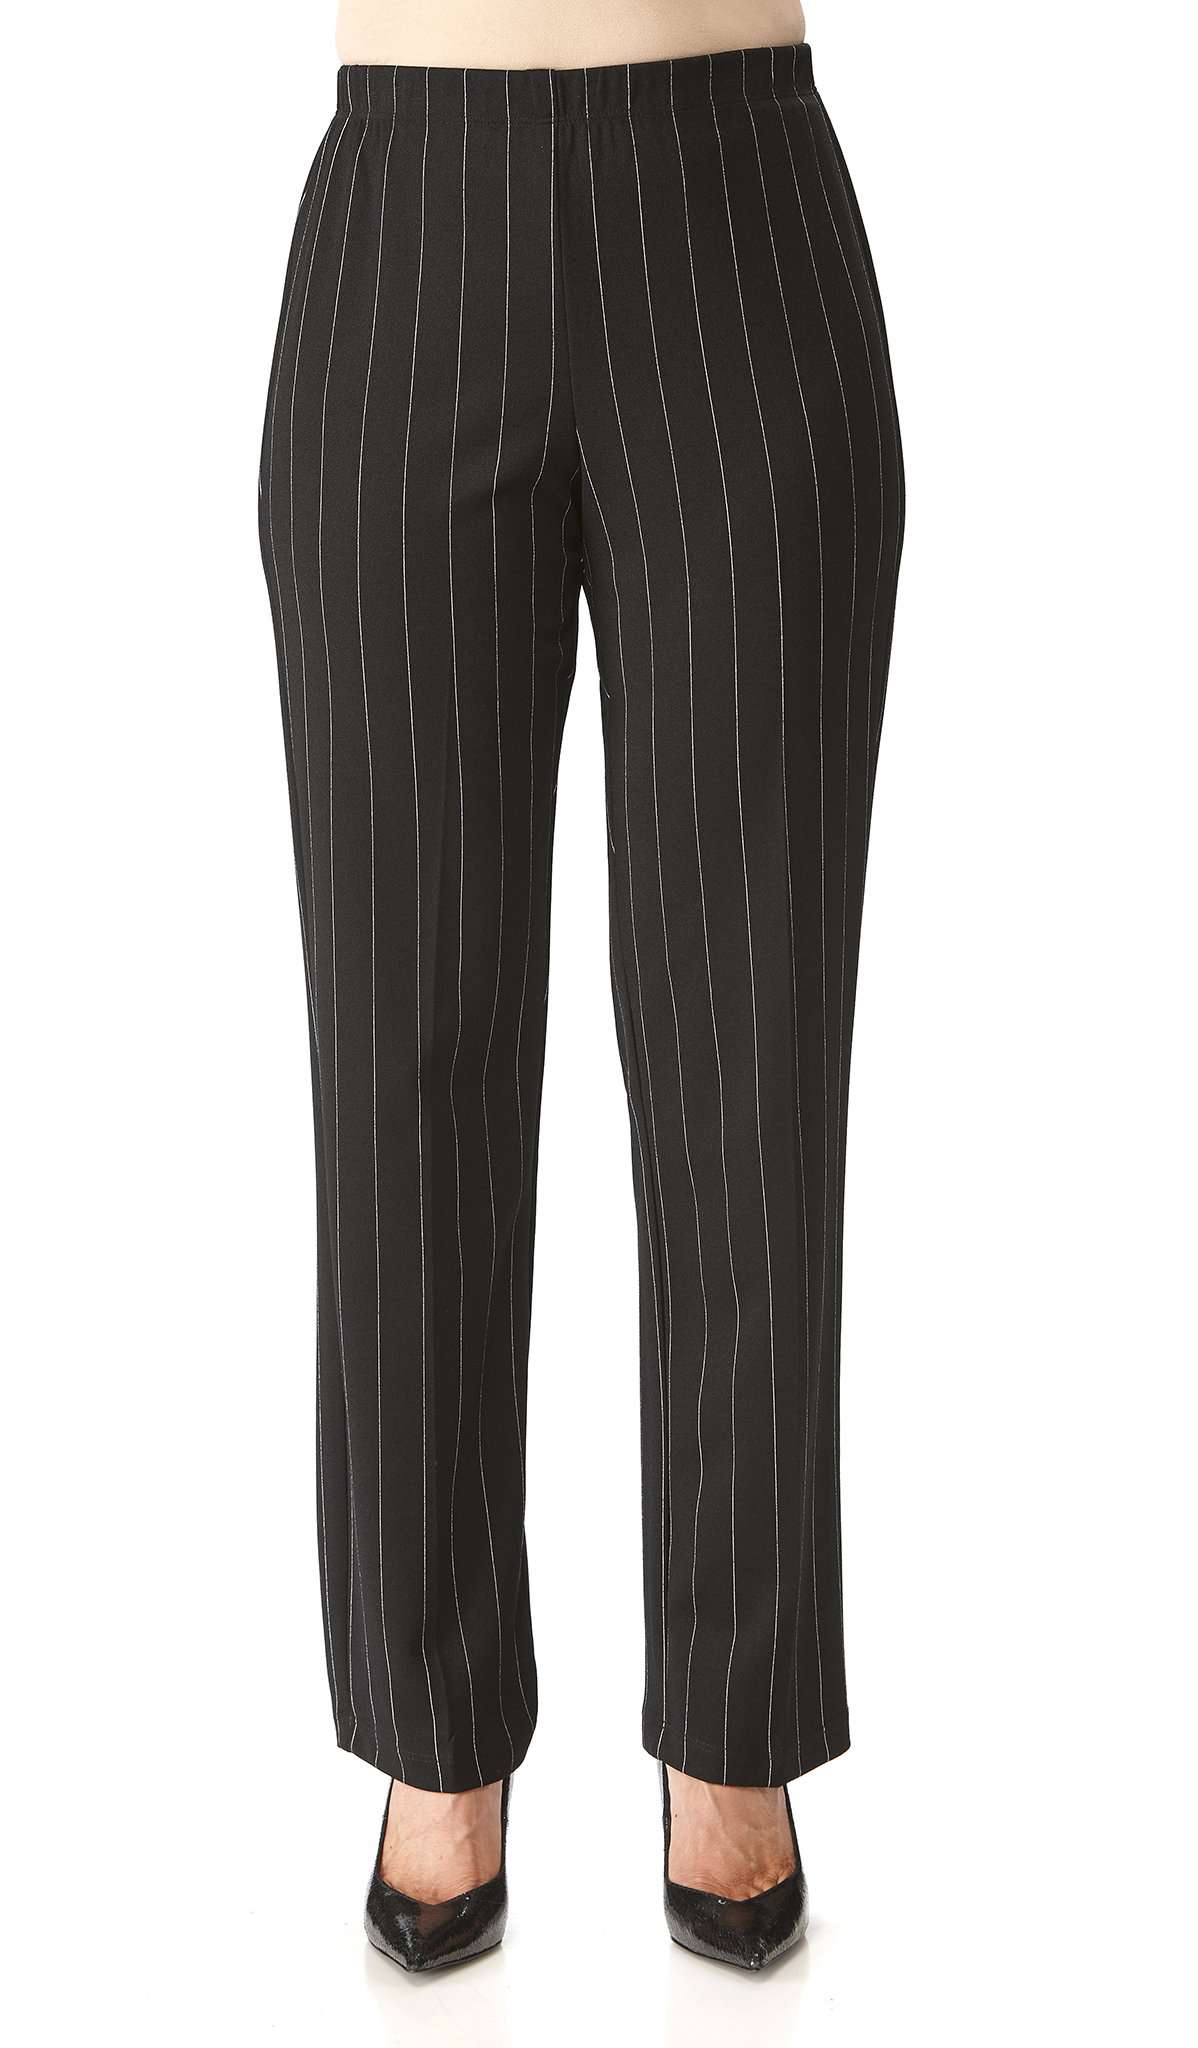 Women's Pants On Sale Black Pinstripe Quality Stretch Pant Pull On Design  Made in Canada